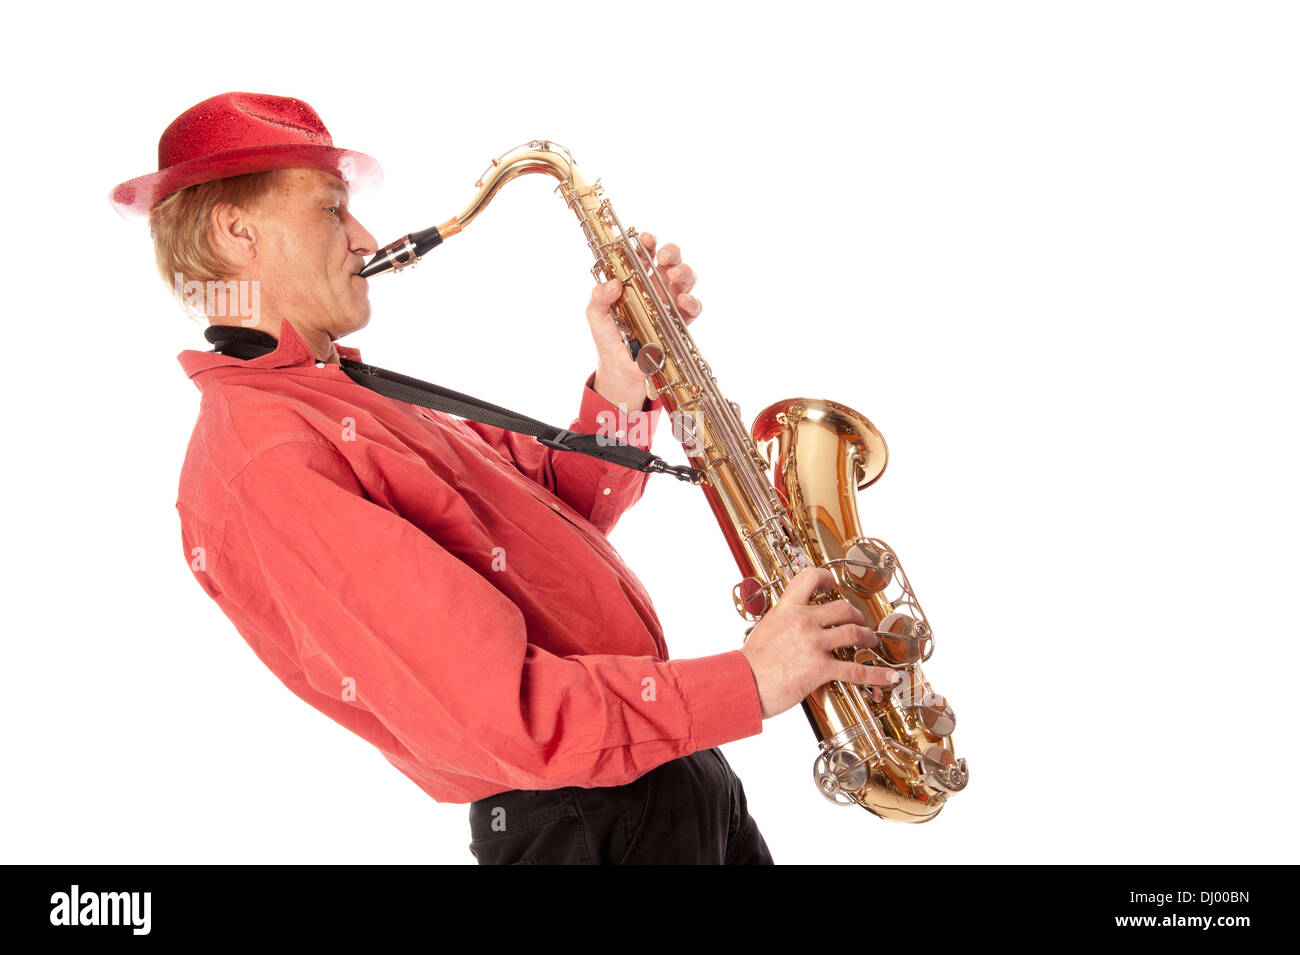 Male performer playing a brass tenor saxophone with silver valves and pearl buttons leaning backwards Stock Photo